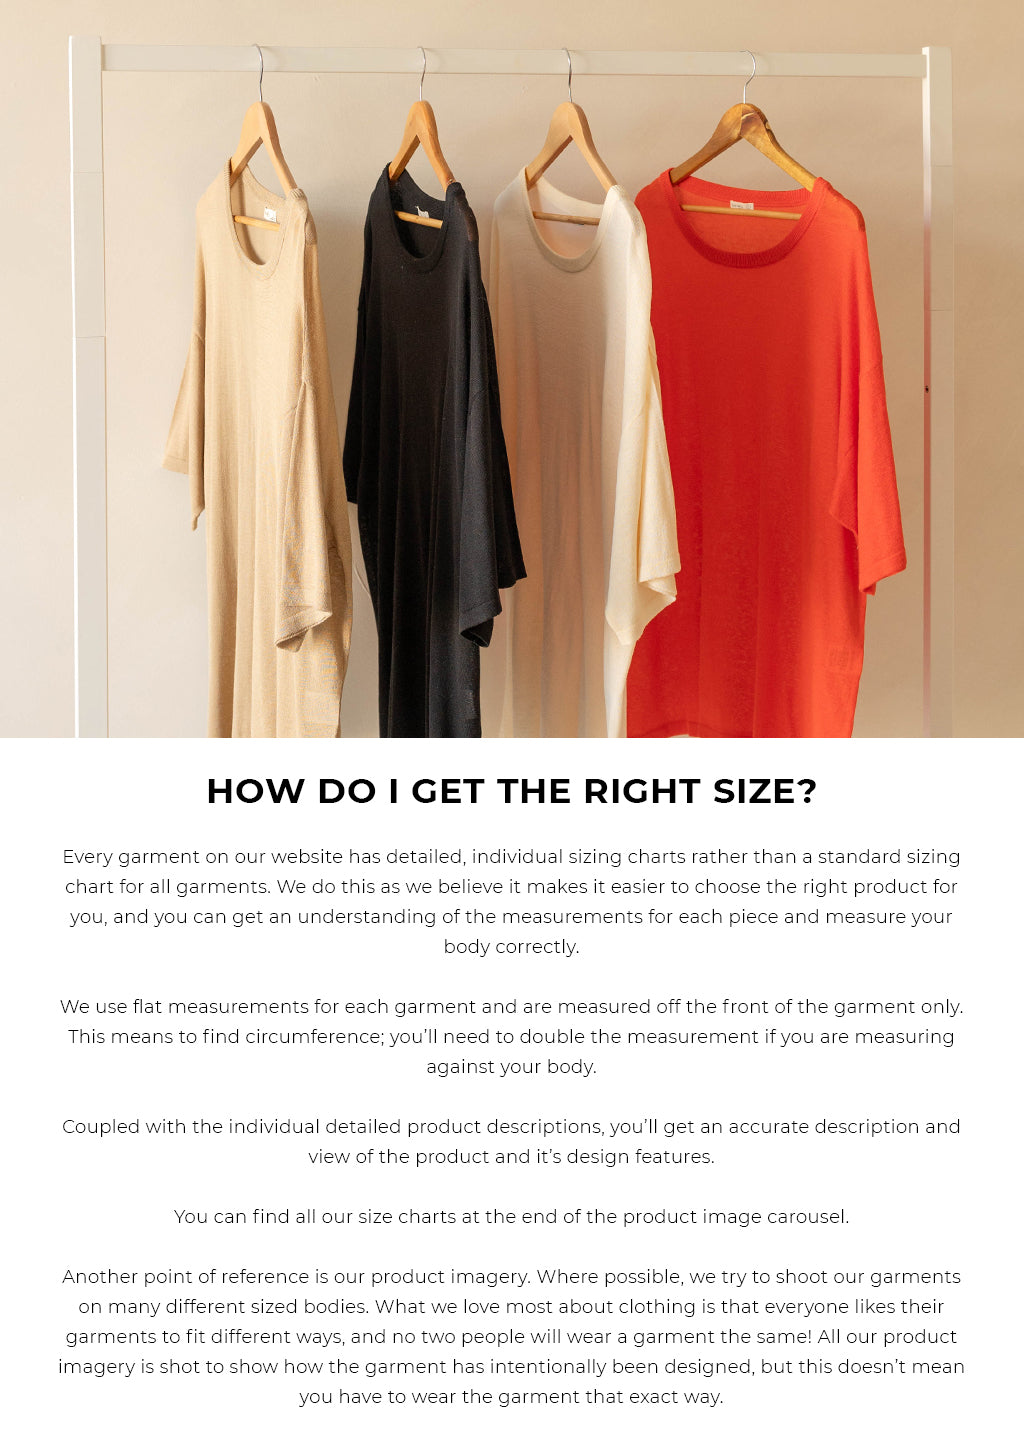 HOW DO I GET THE RIGHT SIZE? Every garment on our website has detailed, individual sizing charts rather than a standard sizing chart for all garments. We do this as we believe it makes it easier to choose the right product for you, and you can get an understanding of the measurements for each piece and measure your body correctly. We use flat measurements for each garment and are measured off the front of the garment only. This means to find circumference; you’ll need to double the measurement if you are measuring against your body. Coupled with the individual detailed product descriptions, you’ll get an accurate description and view of the product and it’s design features. You can find all our size charts at the end of the product image carousel. Another point of reference is our product imagery. Where possible, we try to shoot our garments on many different sized bodies. What we love most about clothing is that everyone likes their garments to fit different ways, and no two people will wear a garment the same! All our product imagery is shot to show how the garment has intentionally been designed, but this doesn’t mean you have to wear the garment that exact way.